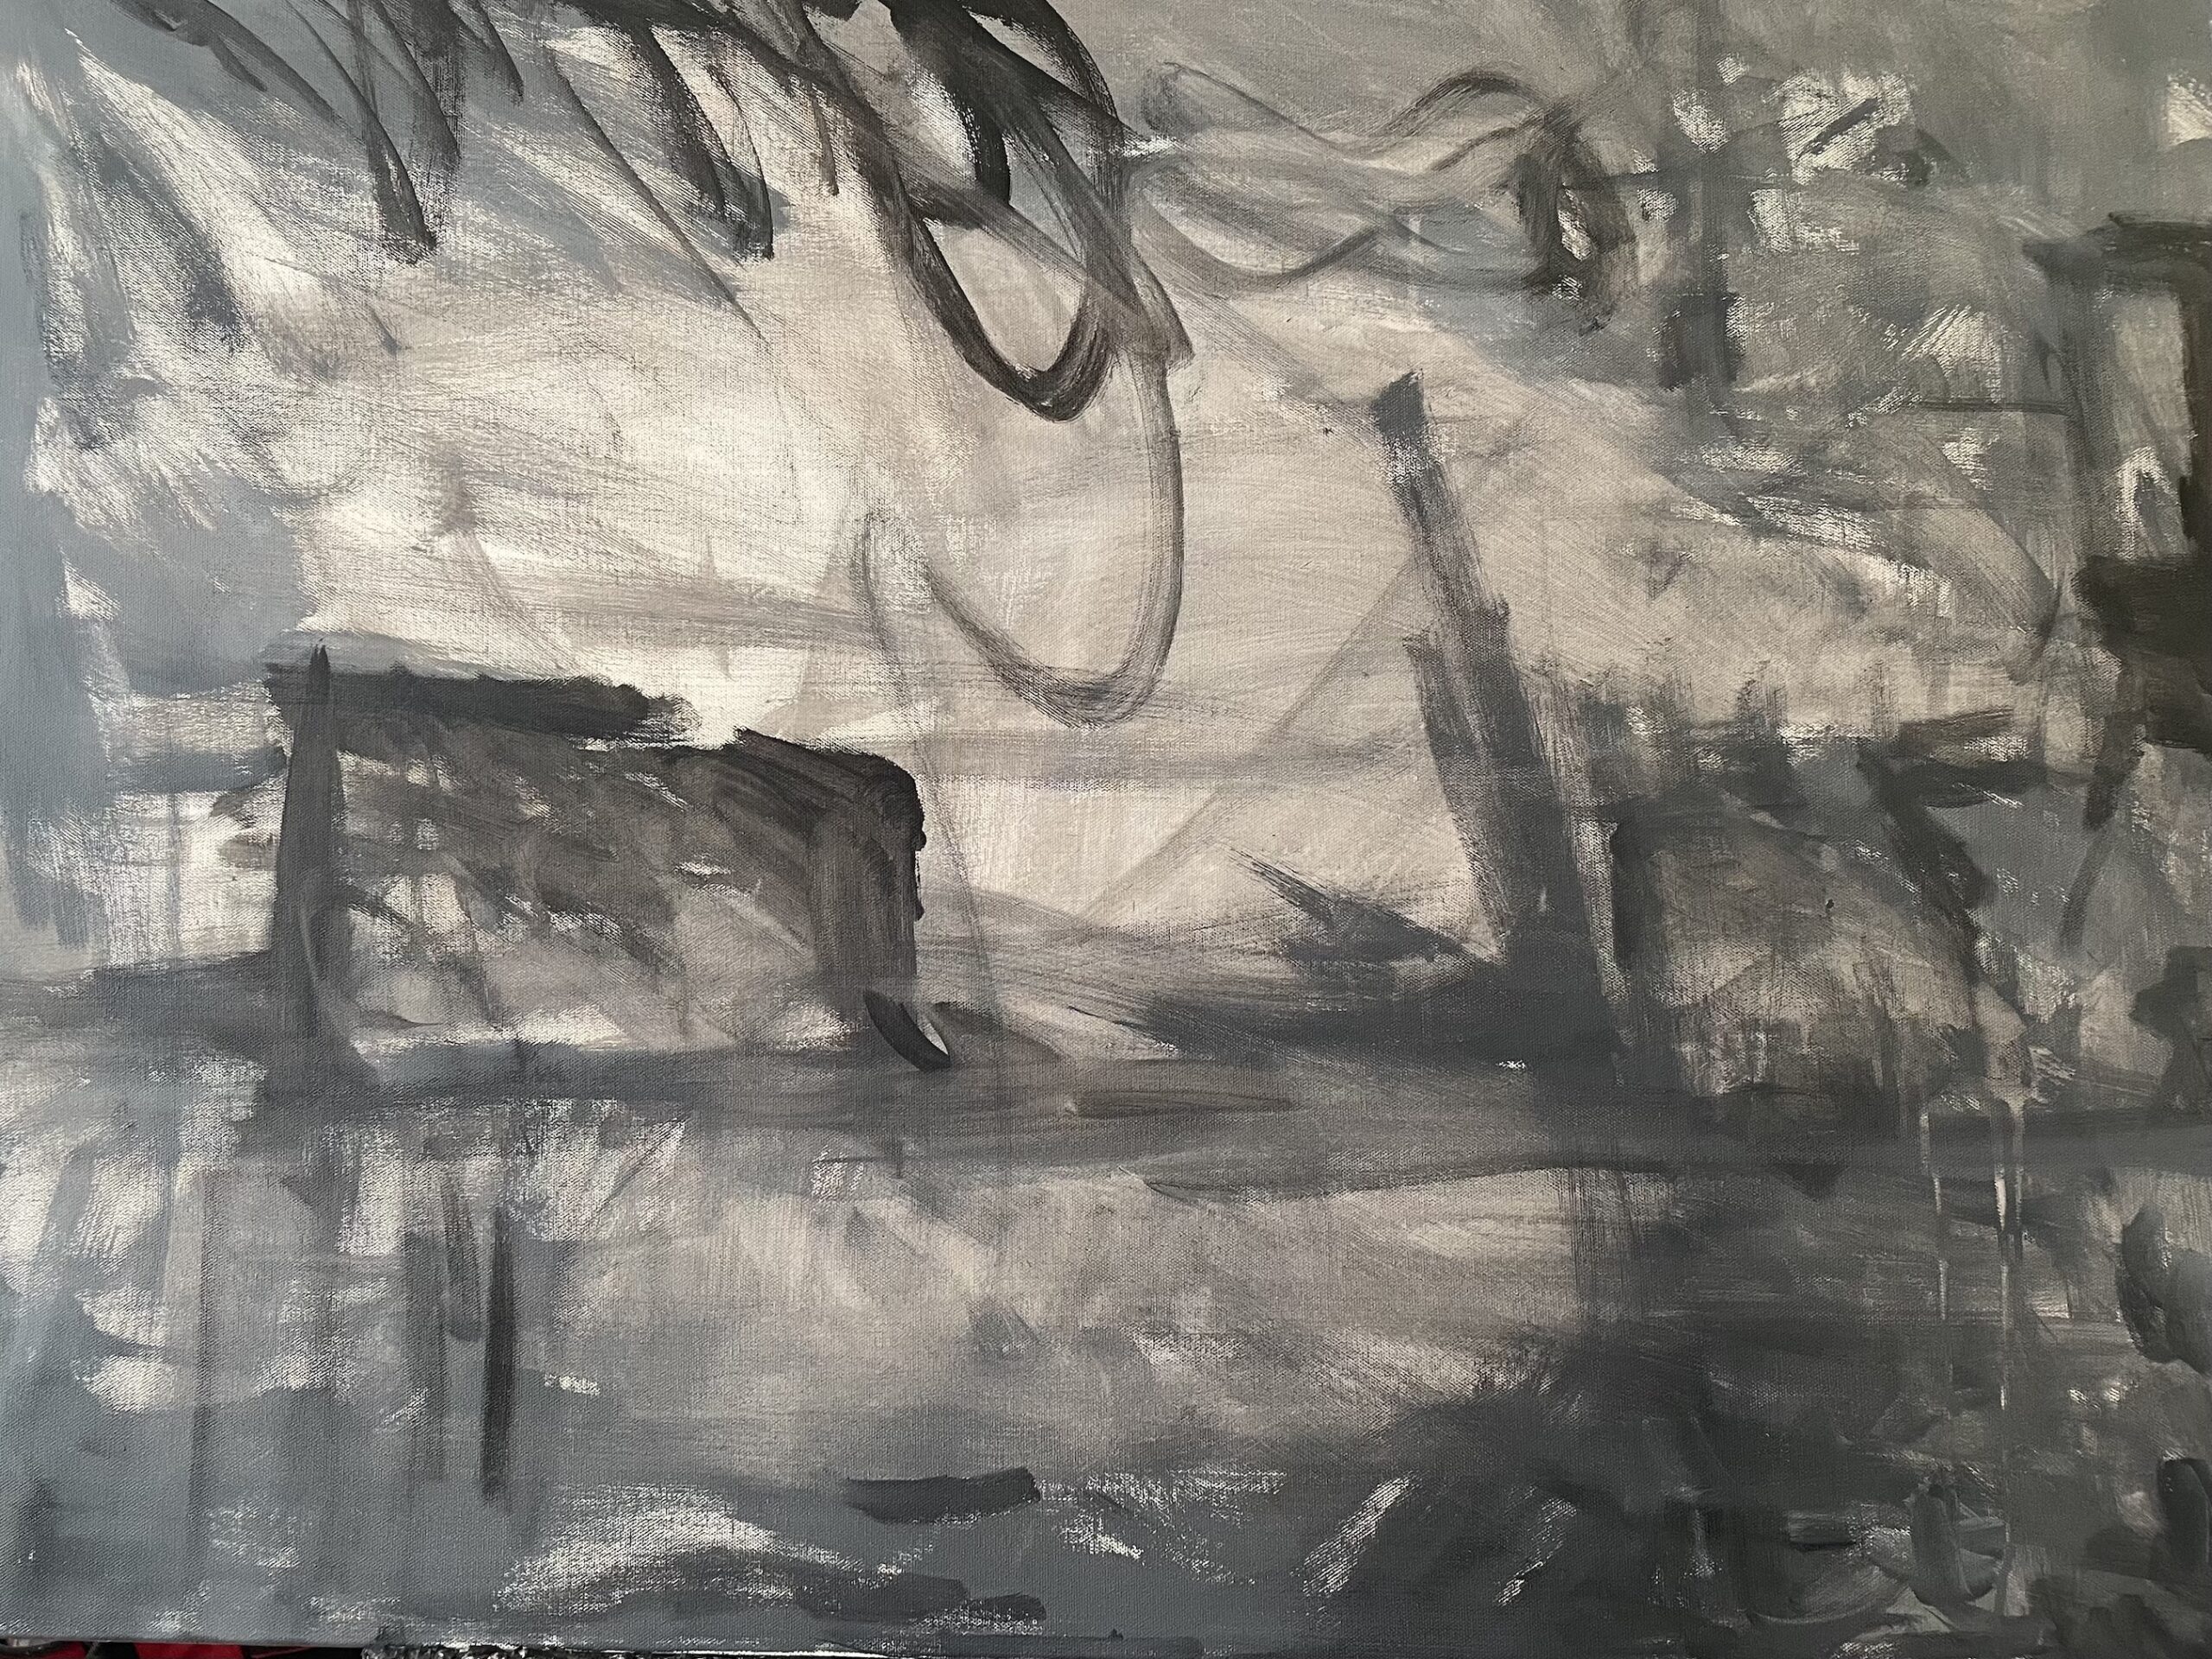 Black and White Abstract Landscape Painting